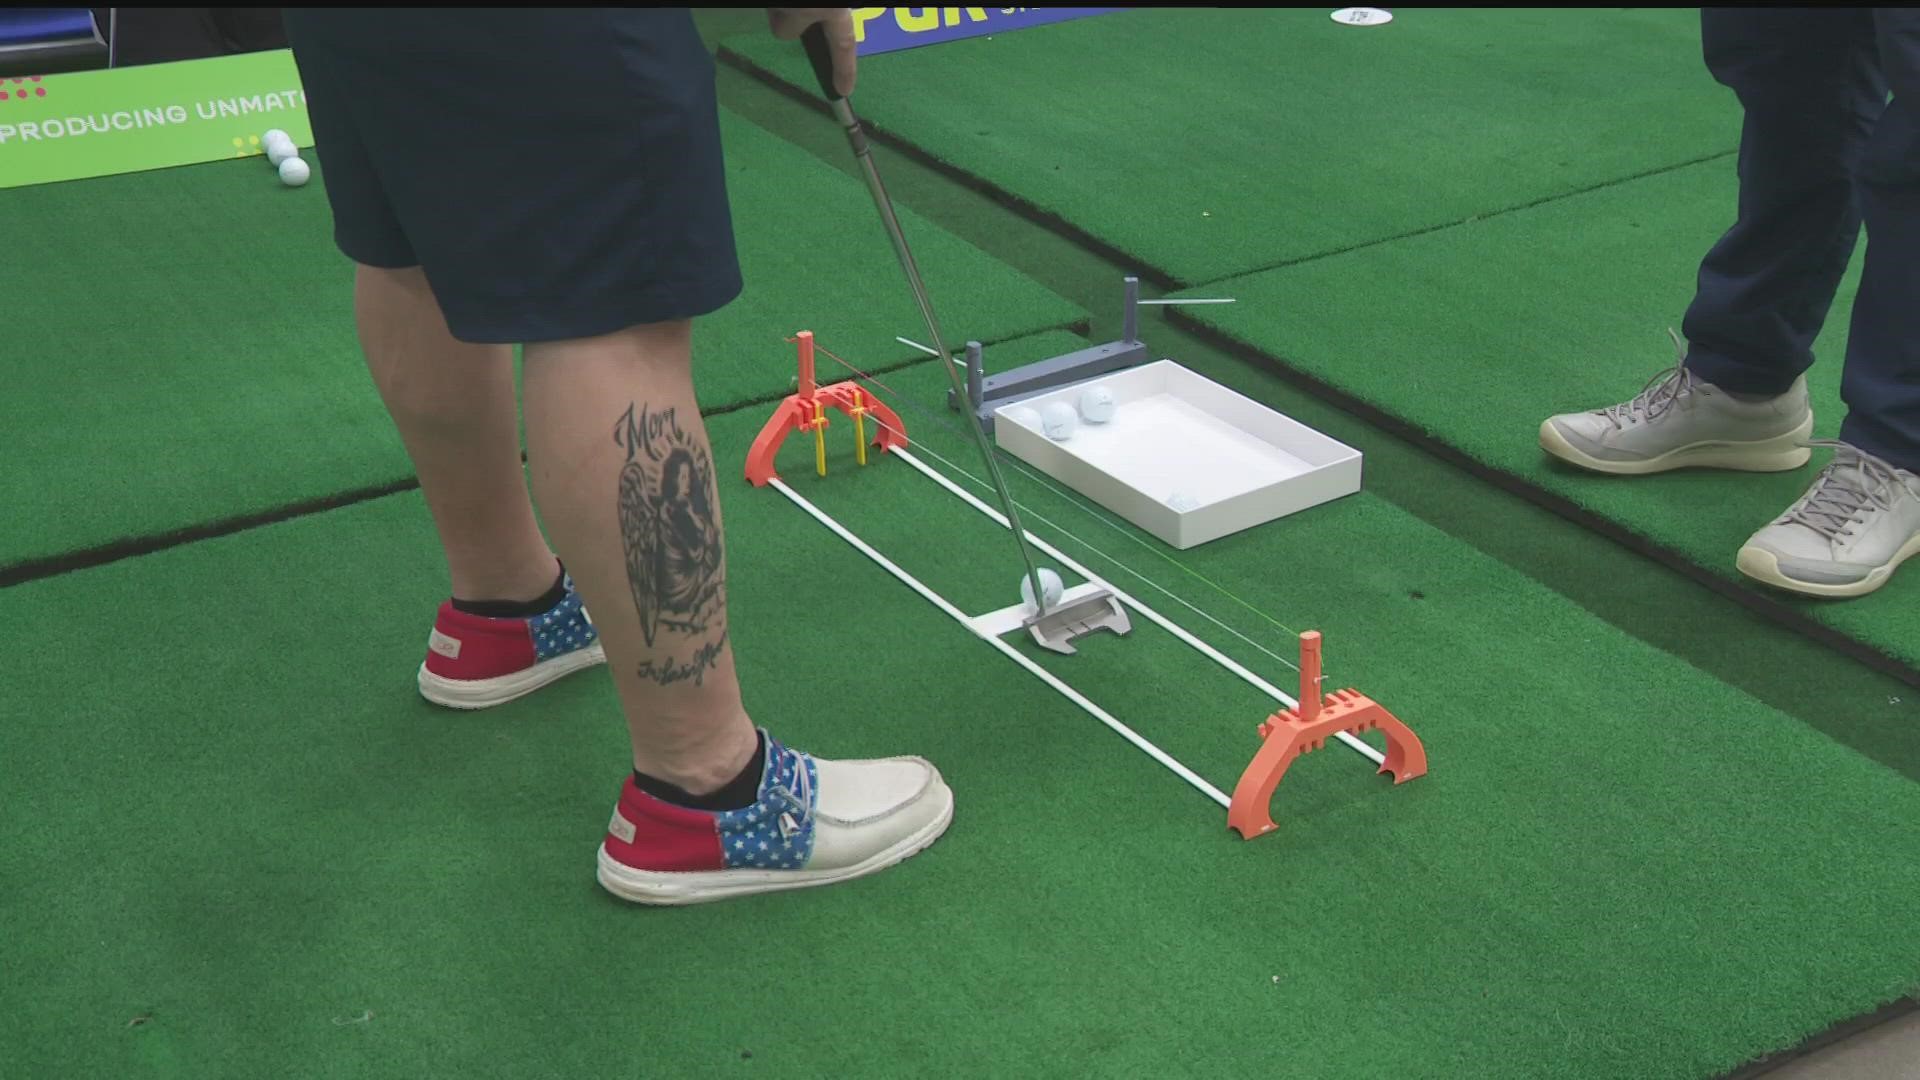 A popular attraction within the golf show has been the $100,000 Pontoon Putt Challenge.